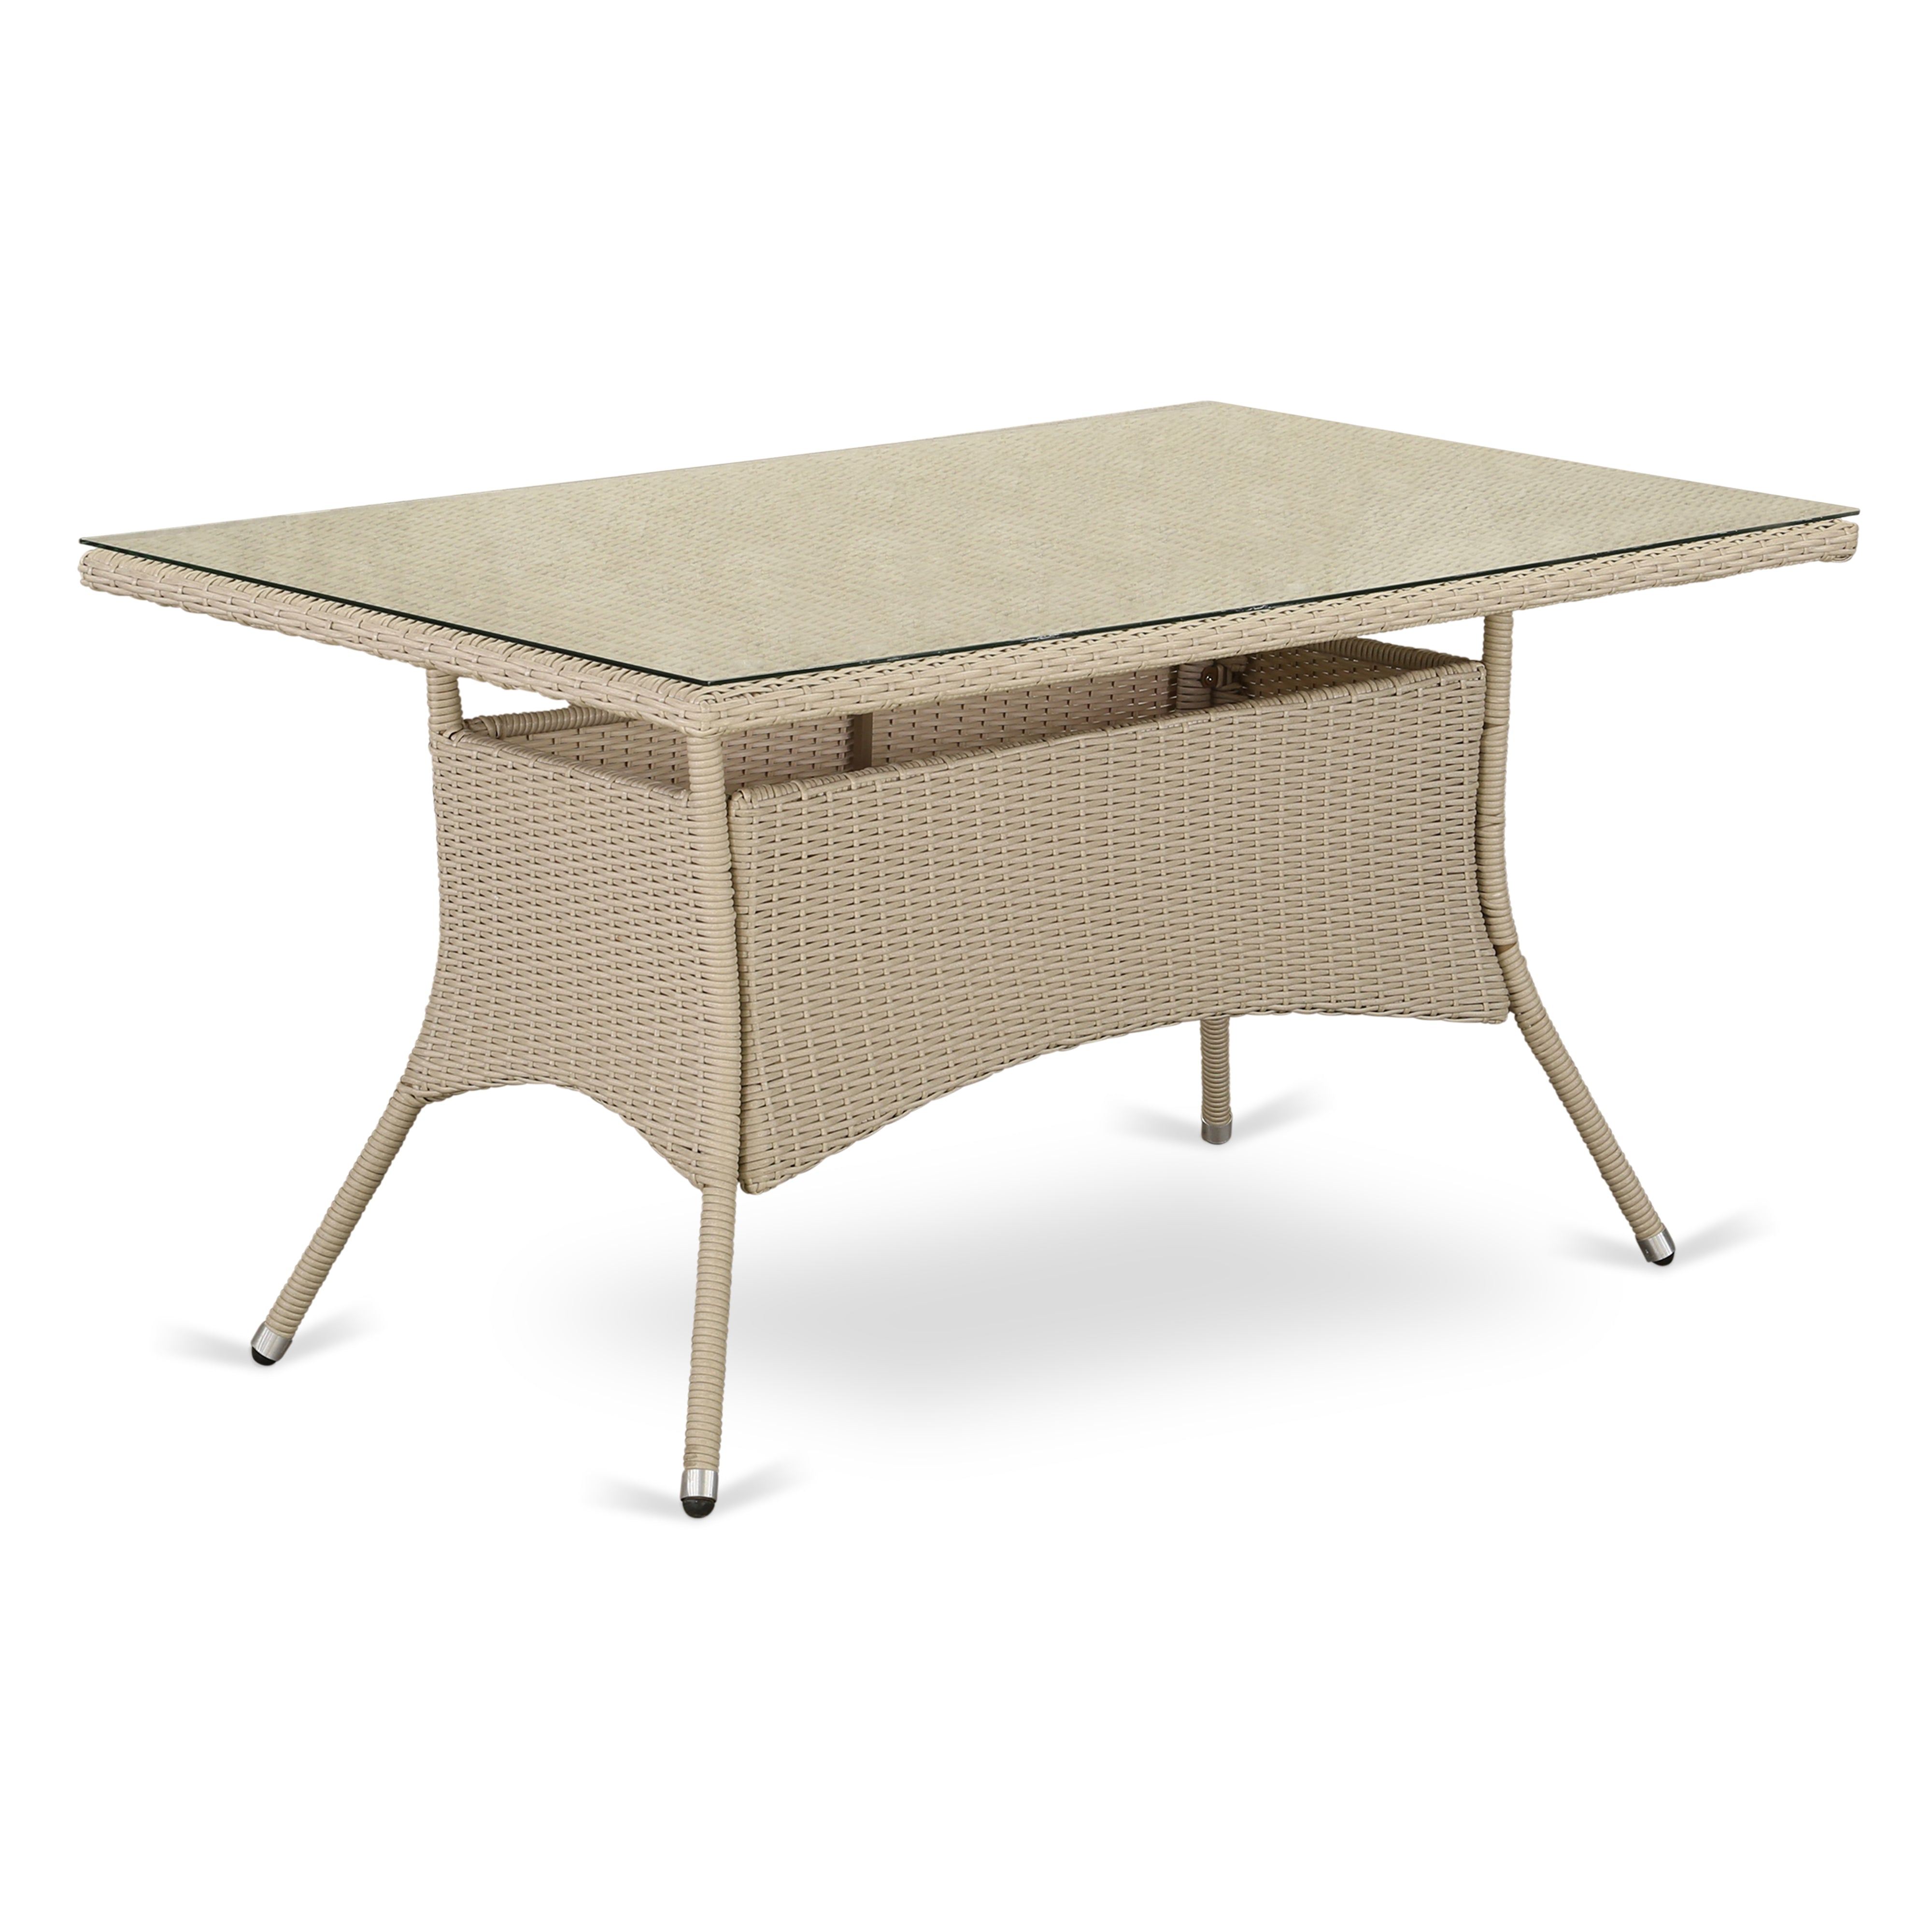 Valencia Metal and Wicker Patio Dining Table in Cream